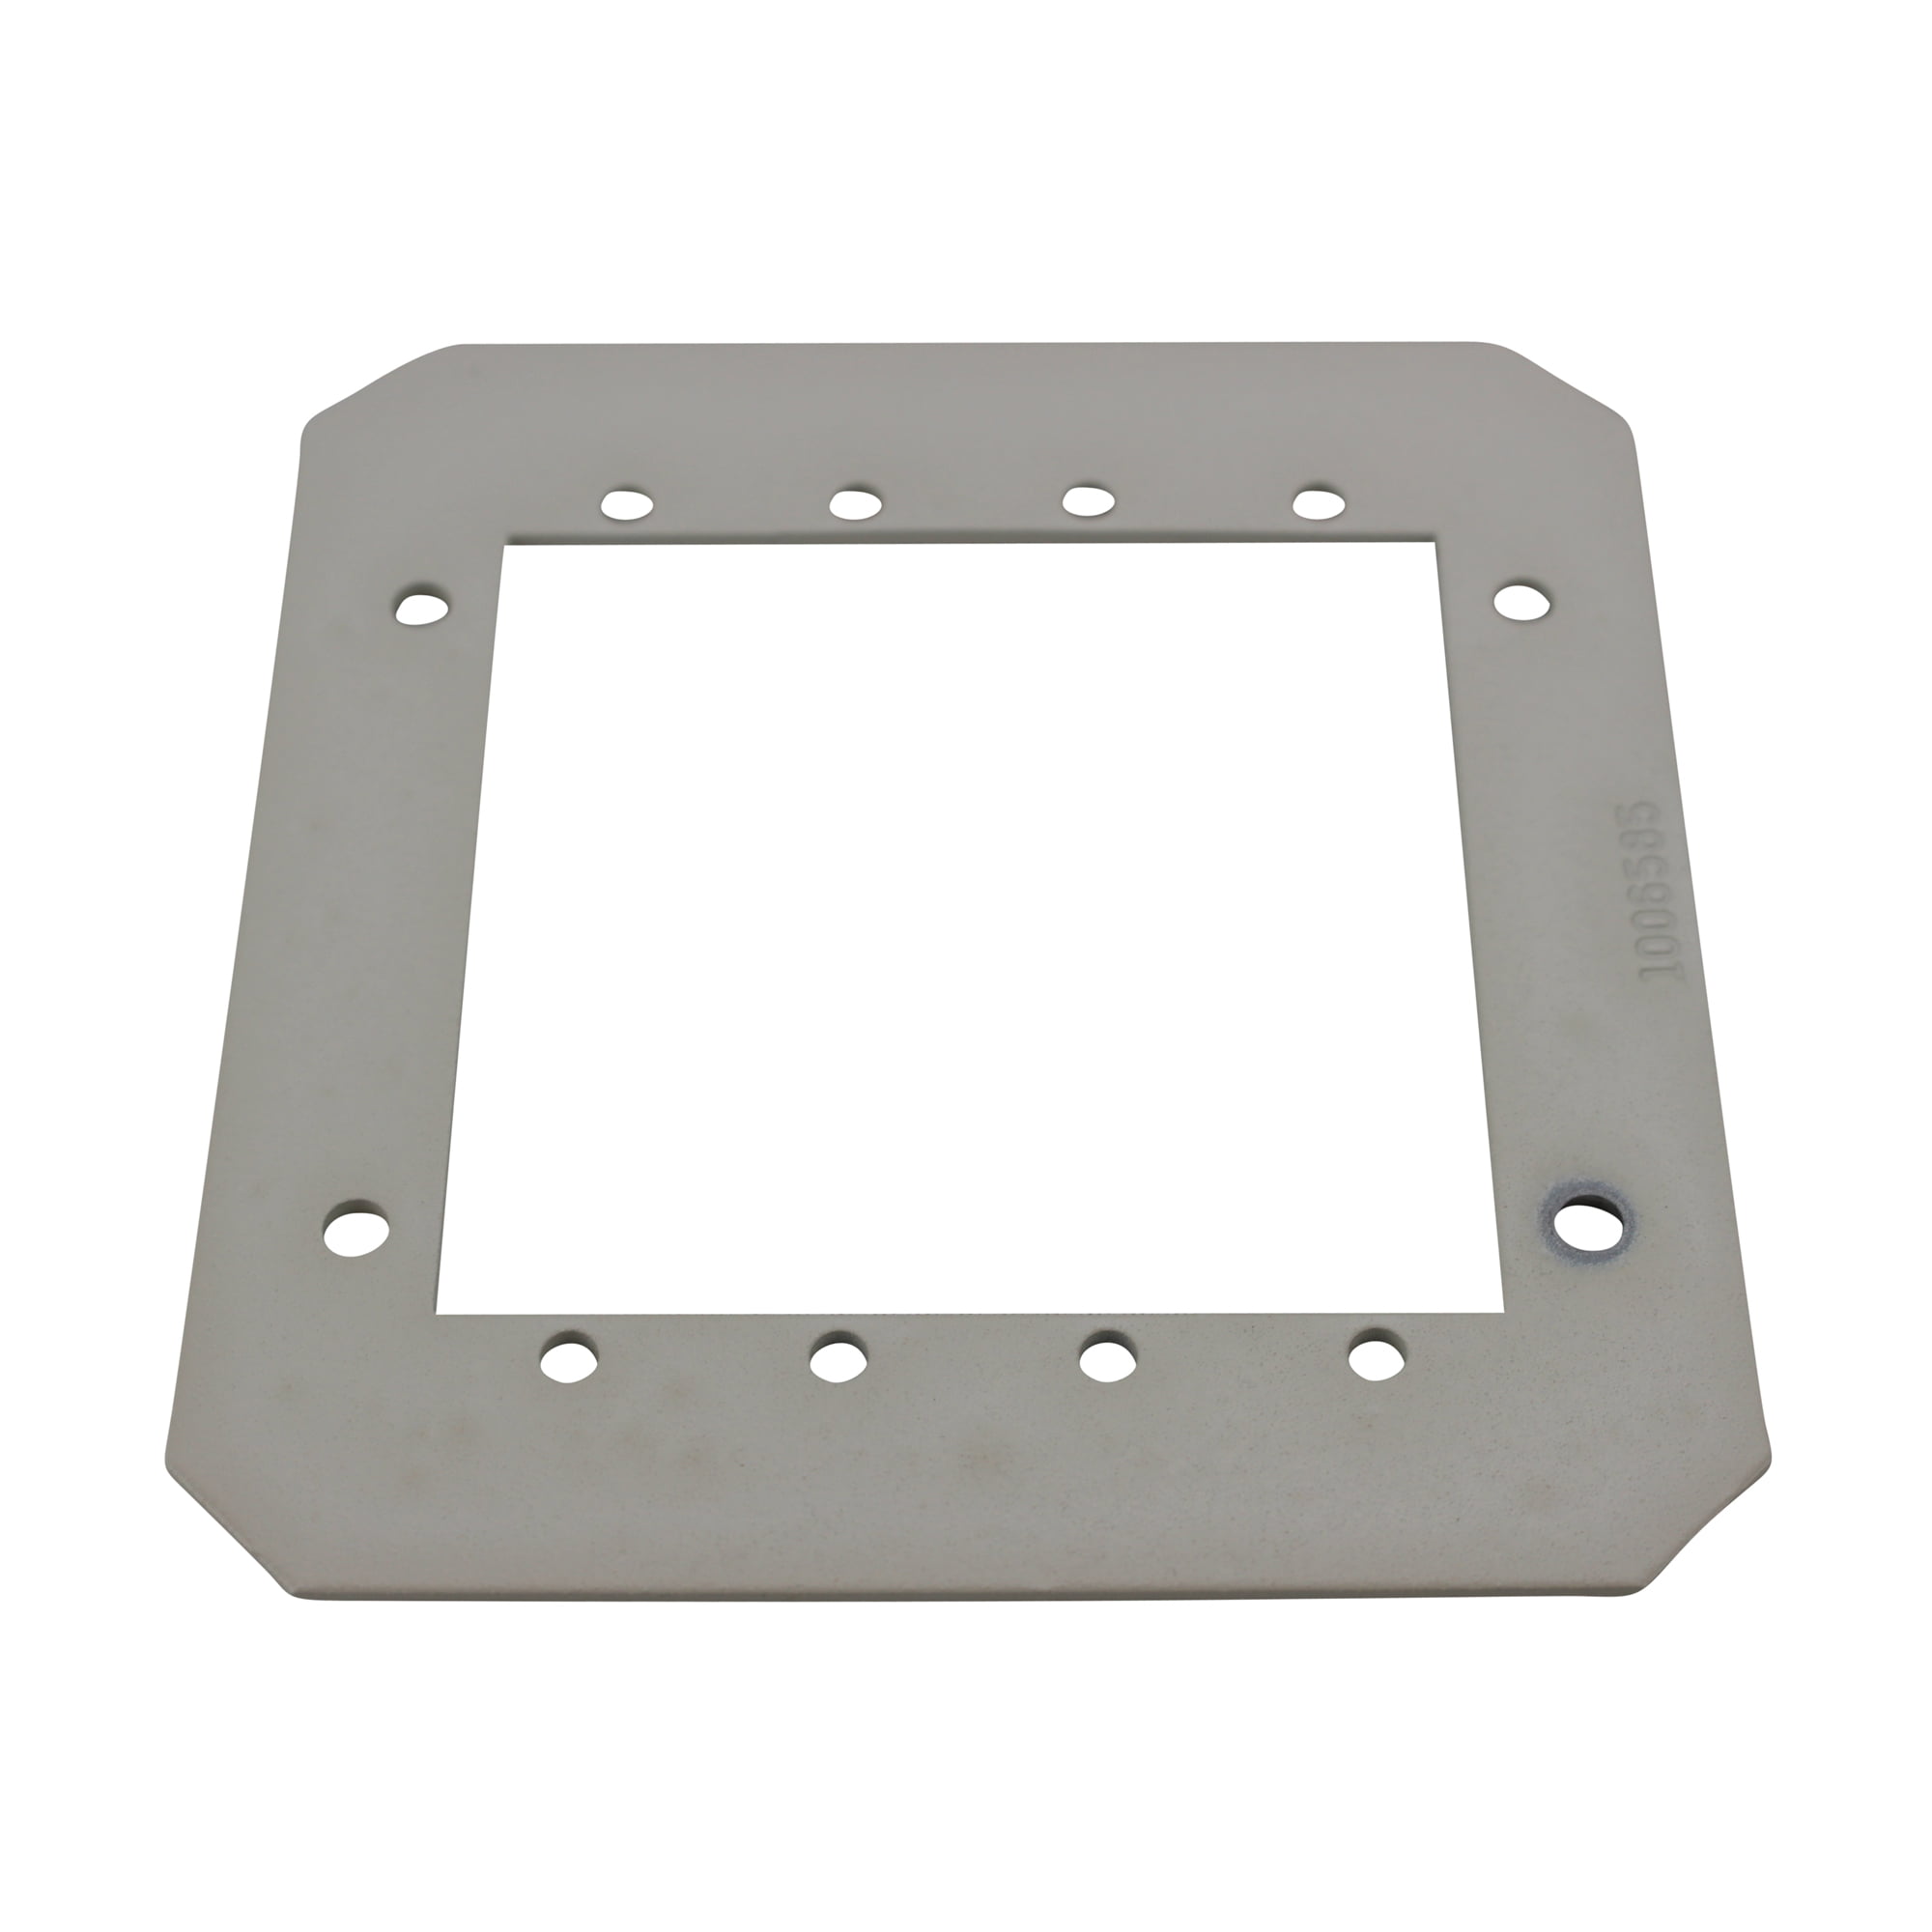 IVORY WIREMOLD LEGRAND 8B SINGLE-GANG EVOLUTION DEVICE MOUNTING PLATE 